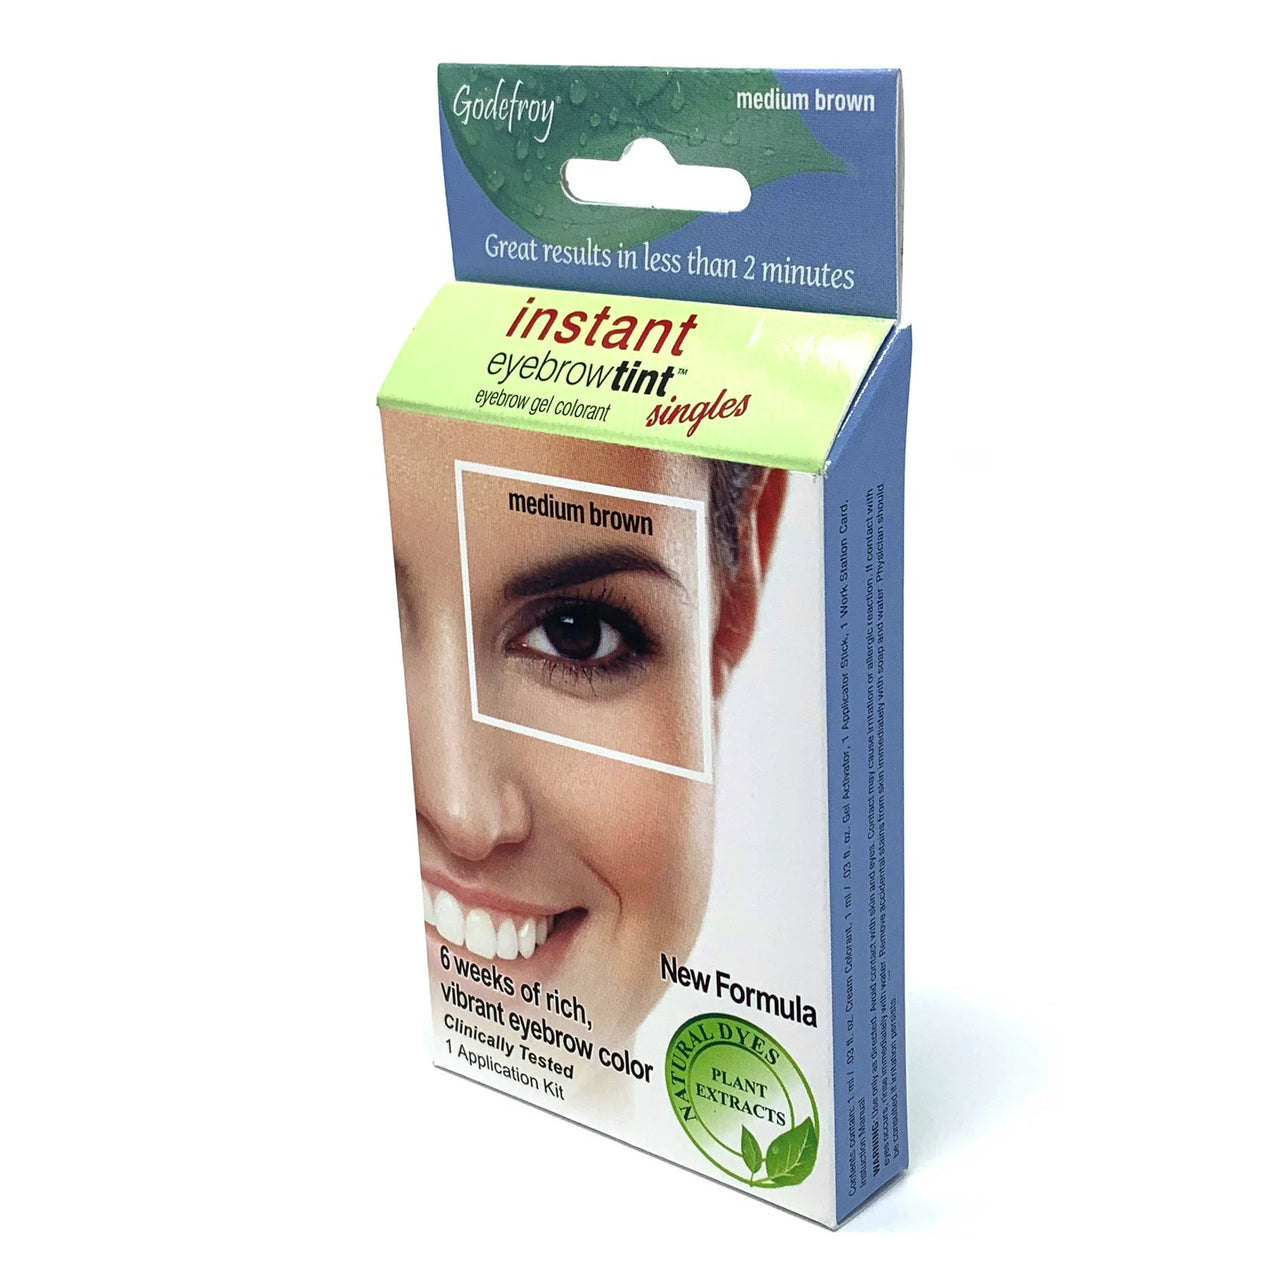 Godefroy Instant Eyebrow Tint 6 Weeks of Rich Vibrant Color - Medium Brown